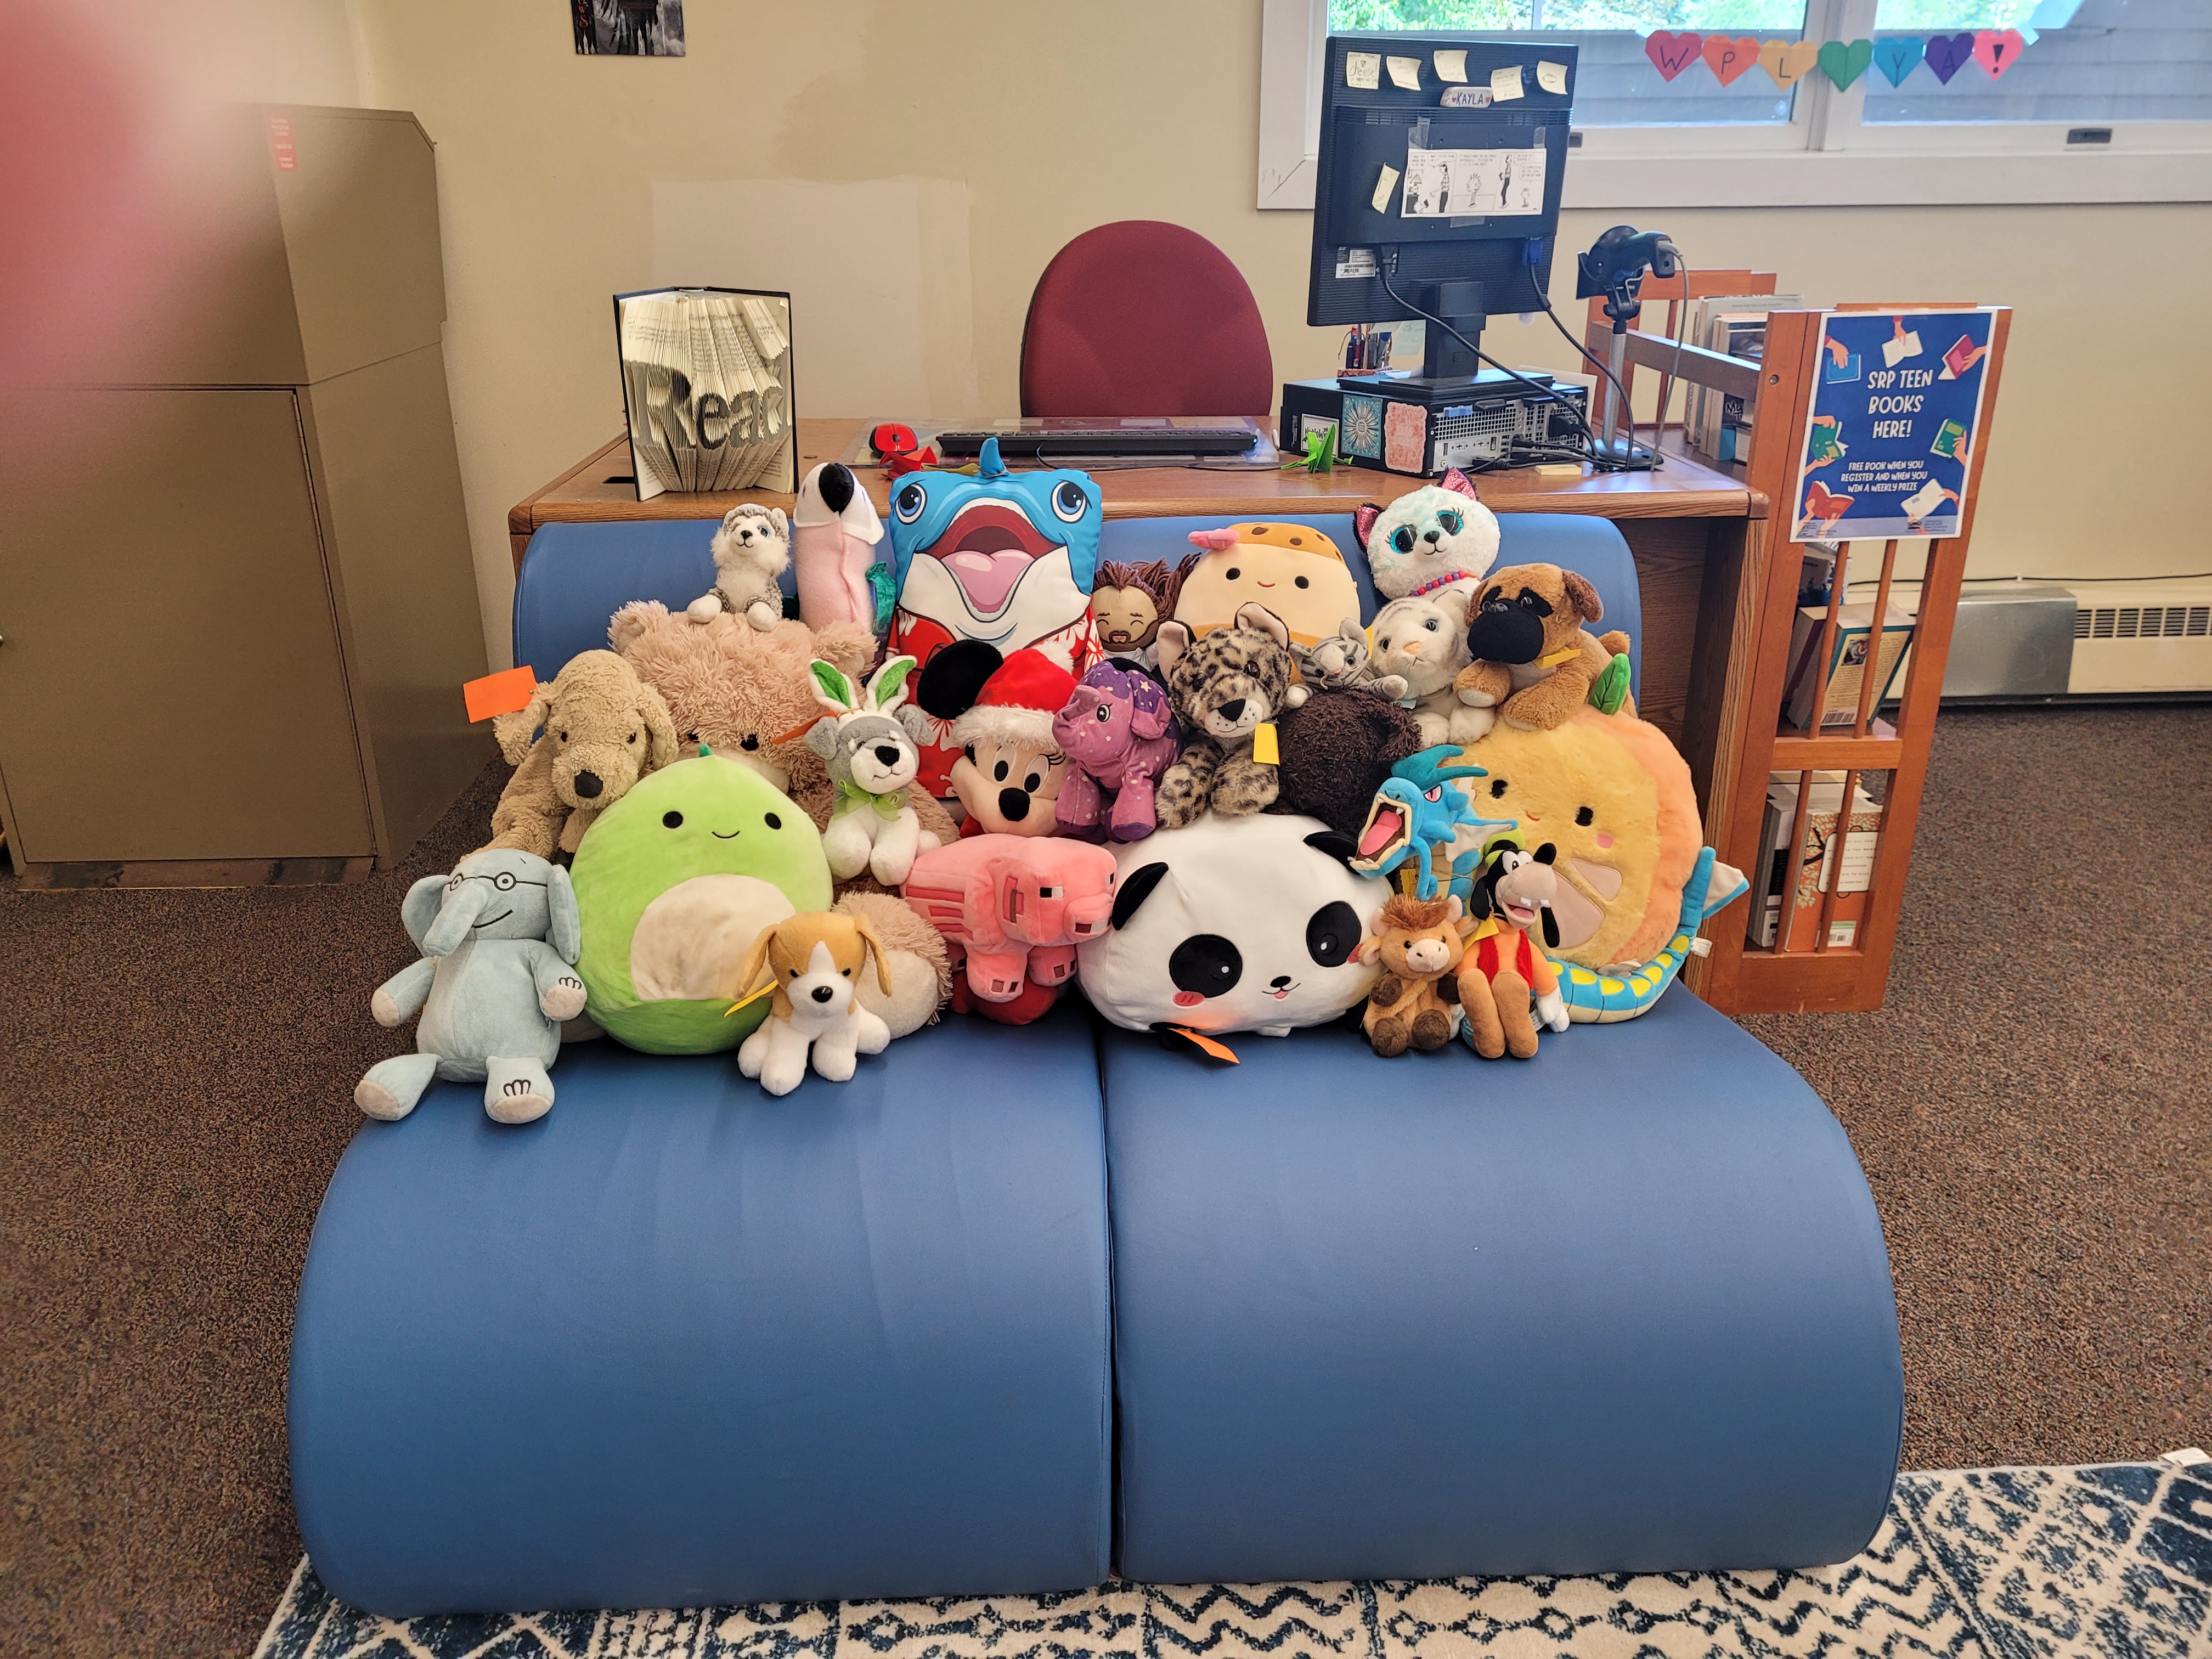 Group picture of stuffed animals on comfy blue chairs at Wells Public Library